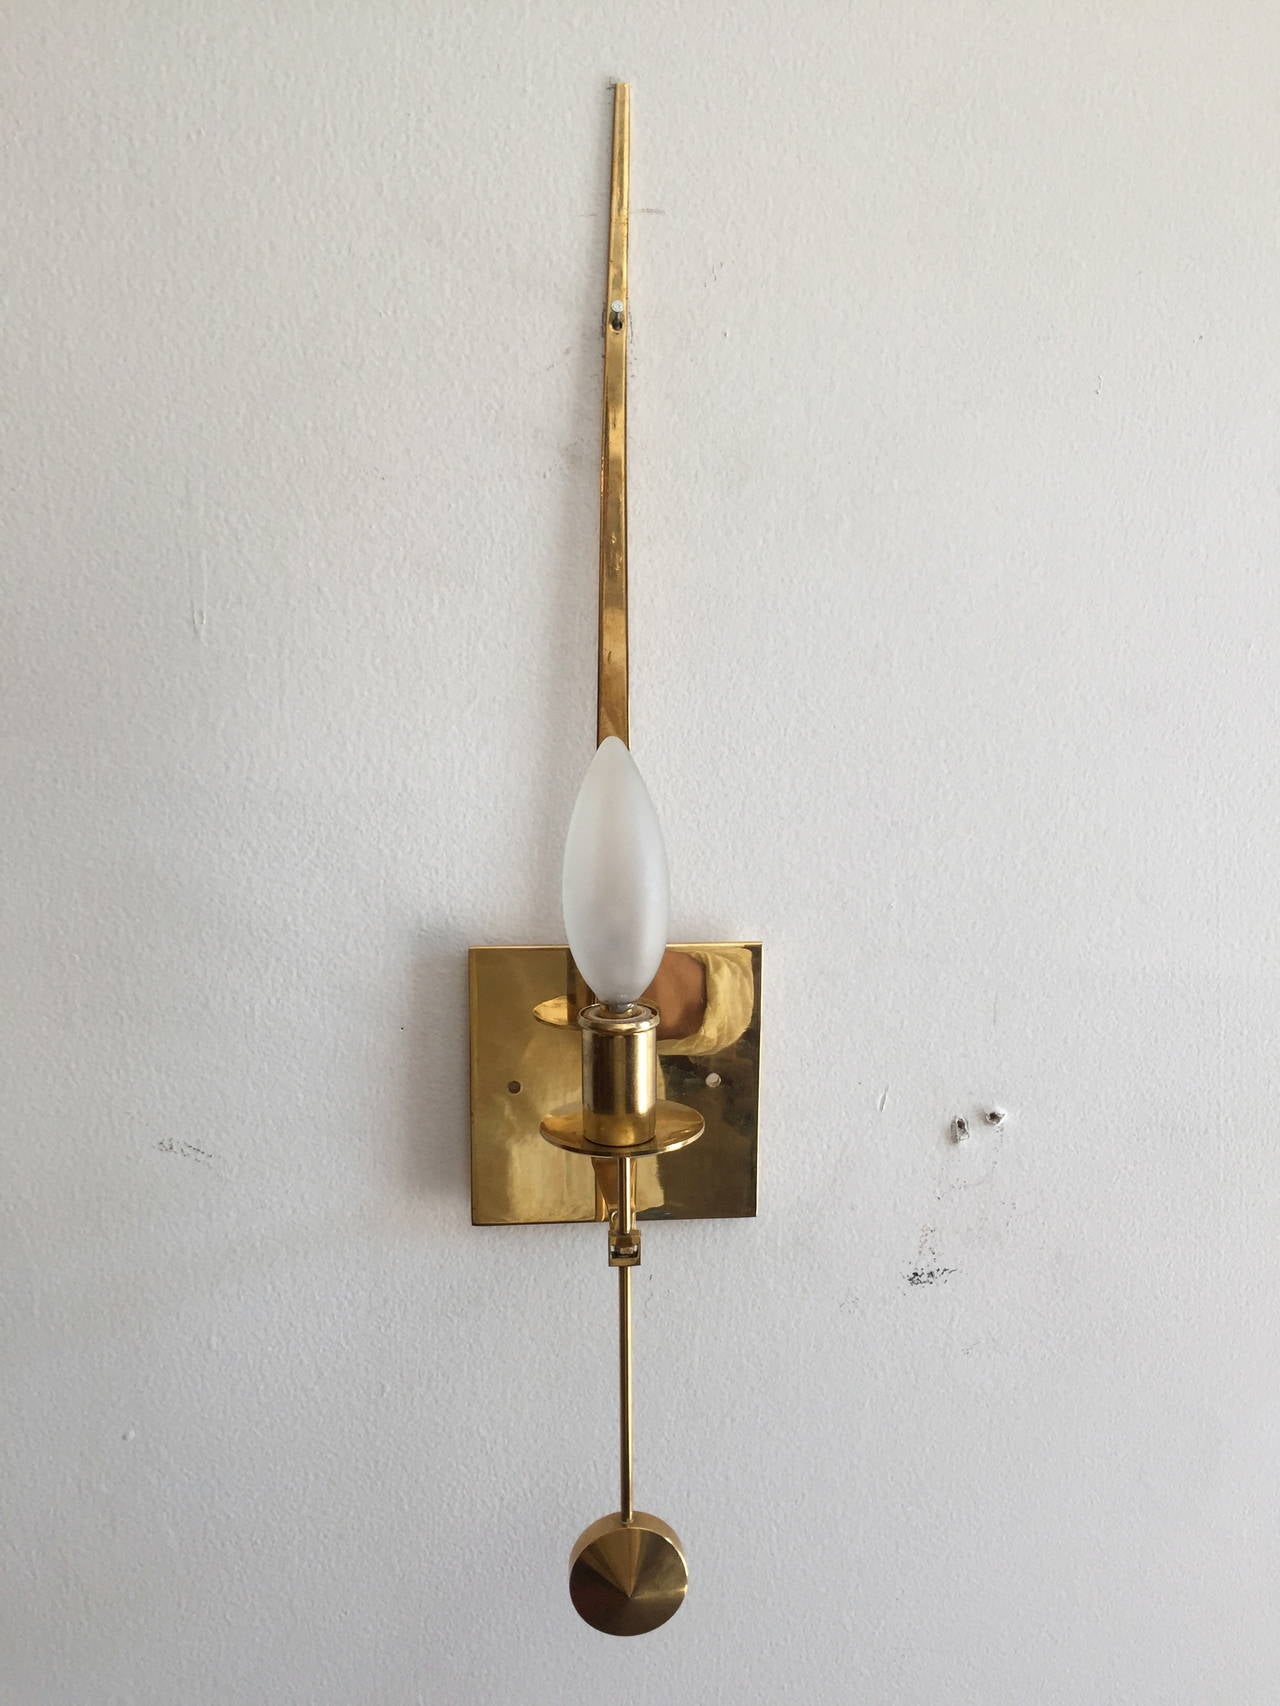 A great set of 1950s "Pendulum" Swedish brass sconces by Pierre Forssell for Skultuna. Rewired. Matching ball screws for the electrical box. No need for pictured nail once screwed into the box.